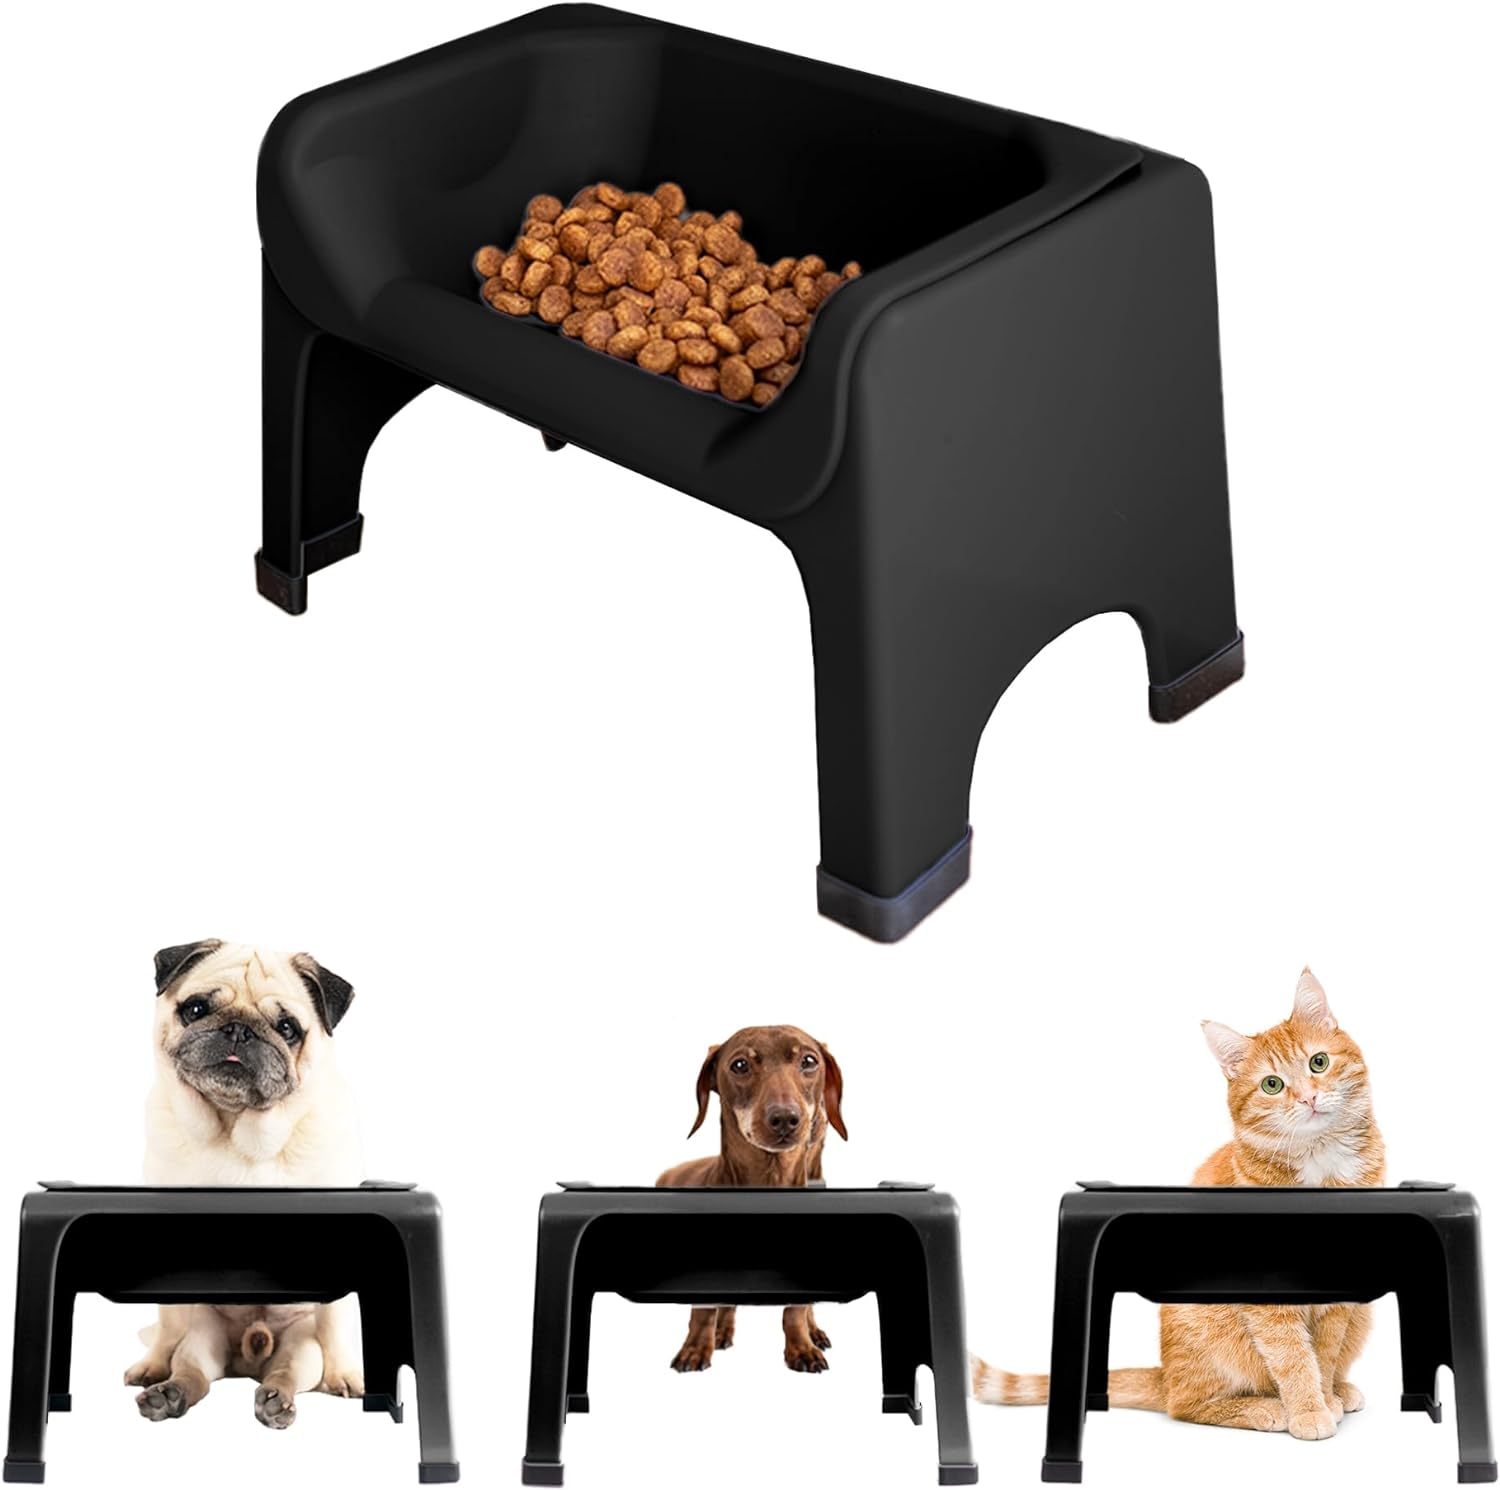 Elevated Dog Bowl for Food Stand 5" for Pets, Black